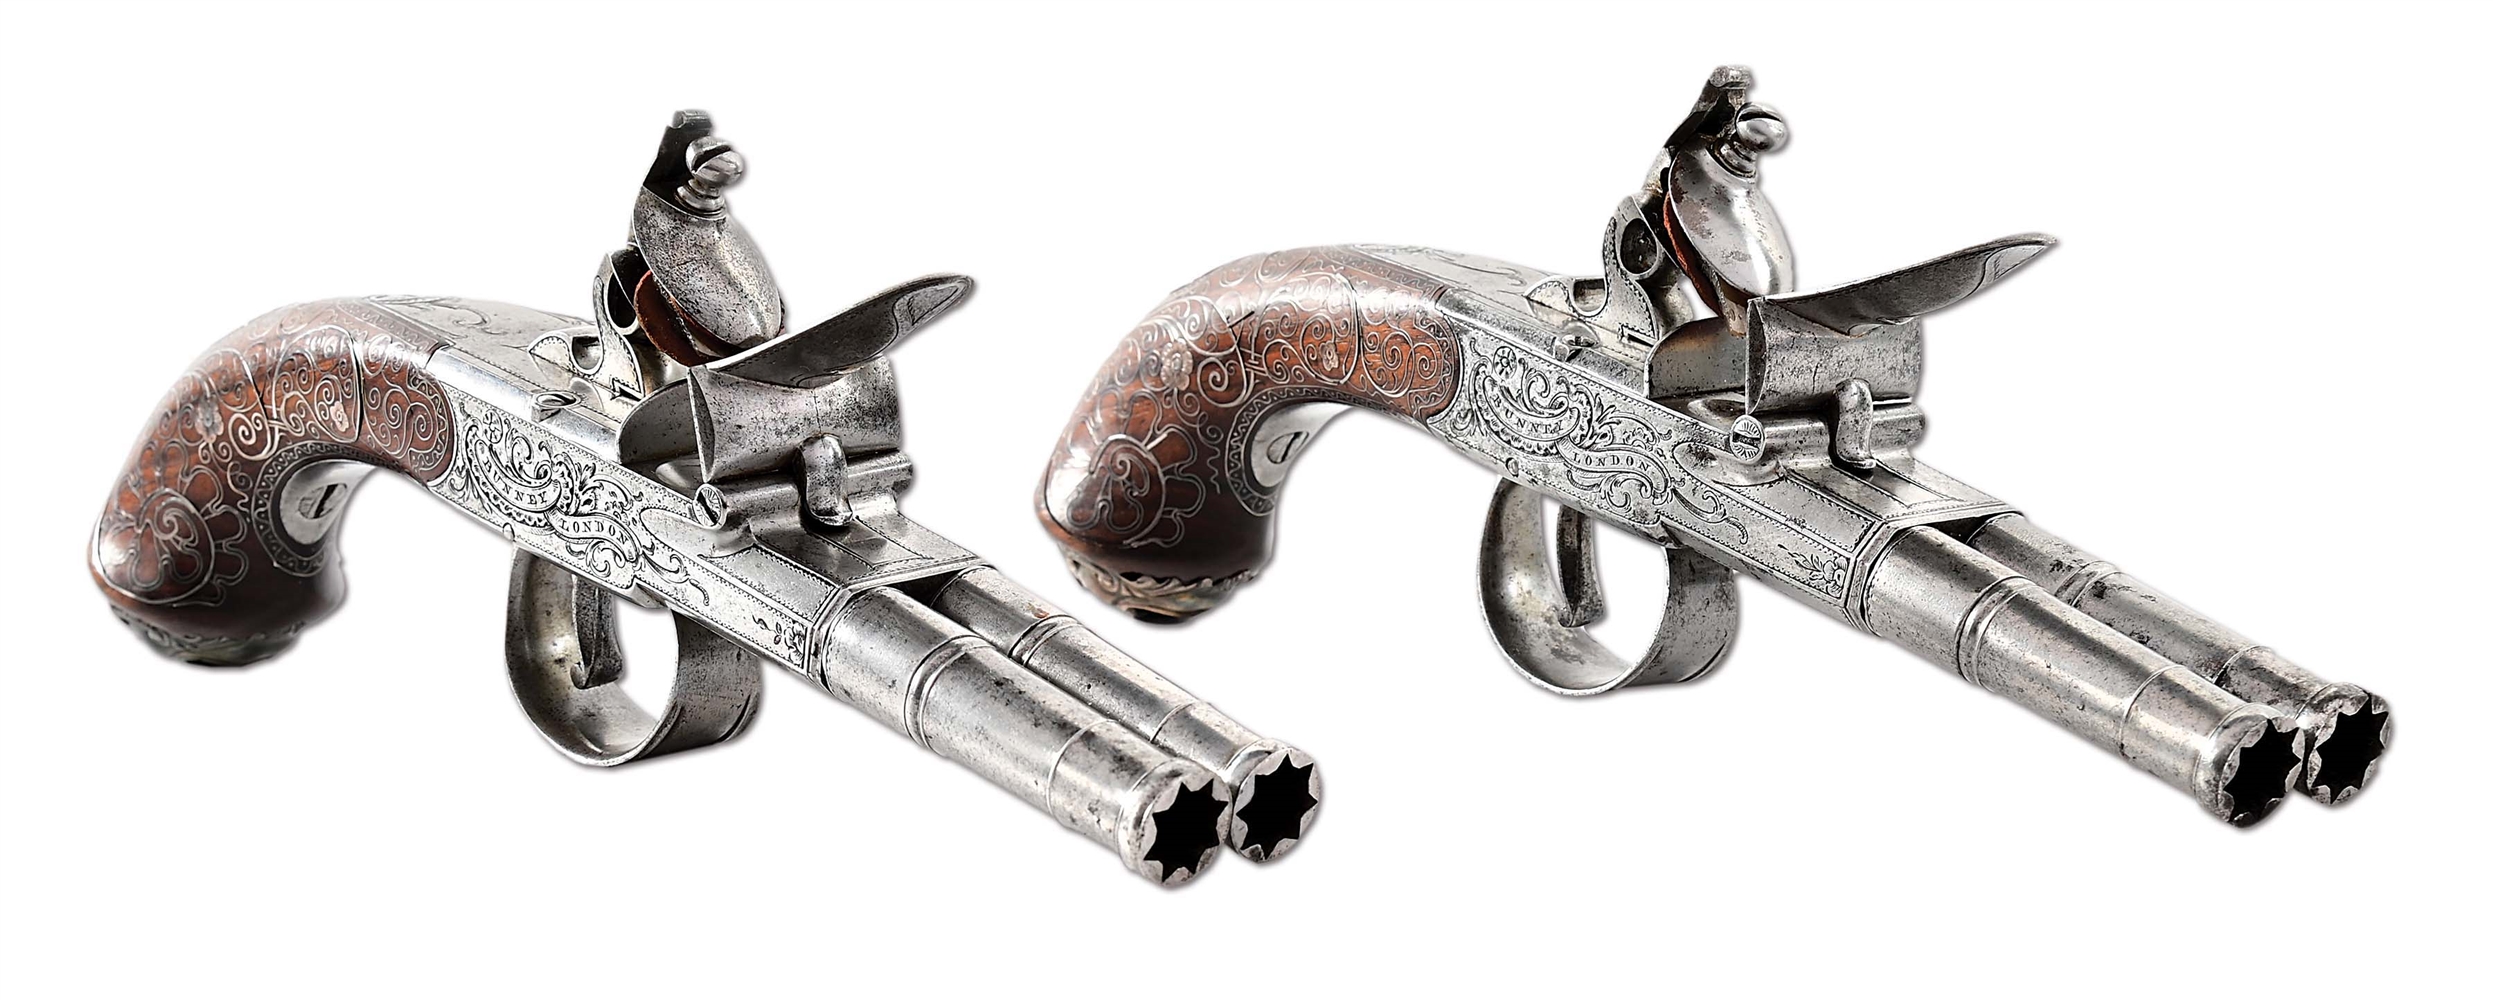 (A) A SCARCE PAIR OF MATCHING BUNNEY DOUBLE BARREL MUFF PISTOLS WITH EYE CATCHING SILVER INLAY AND SILVER MOUNTS.